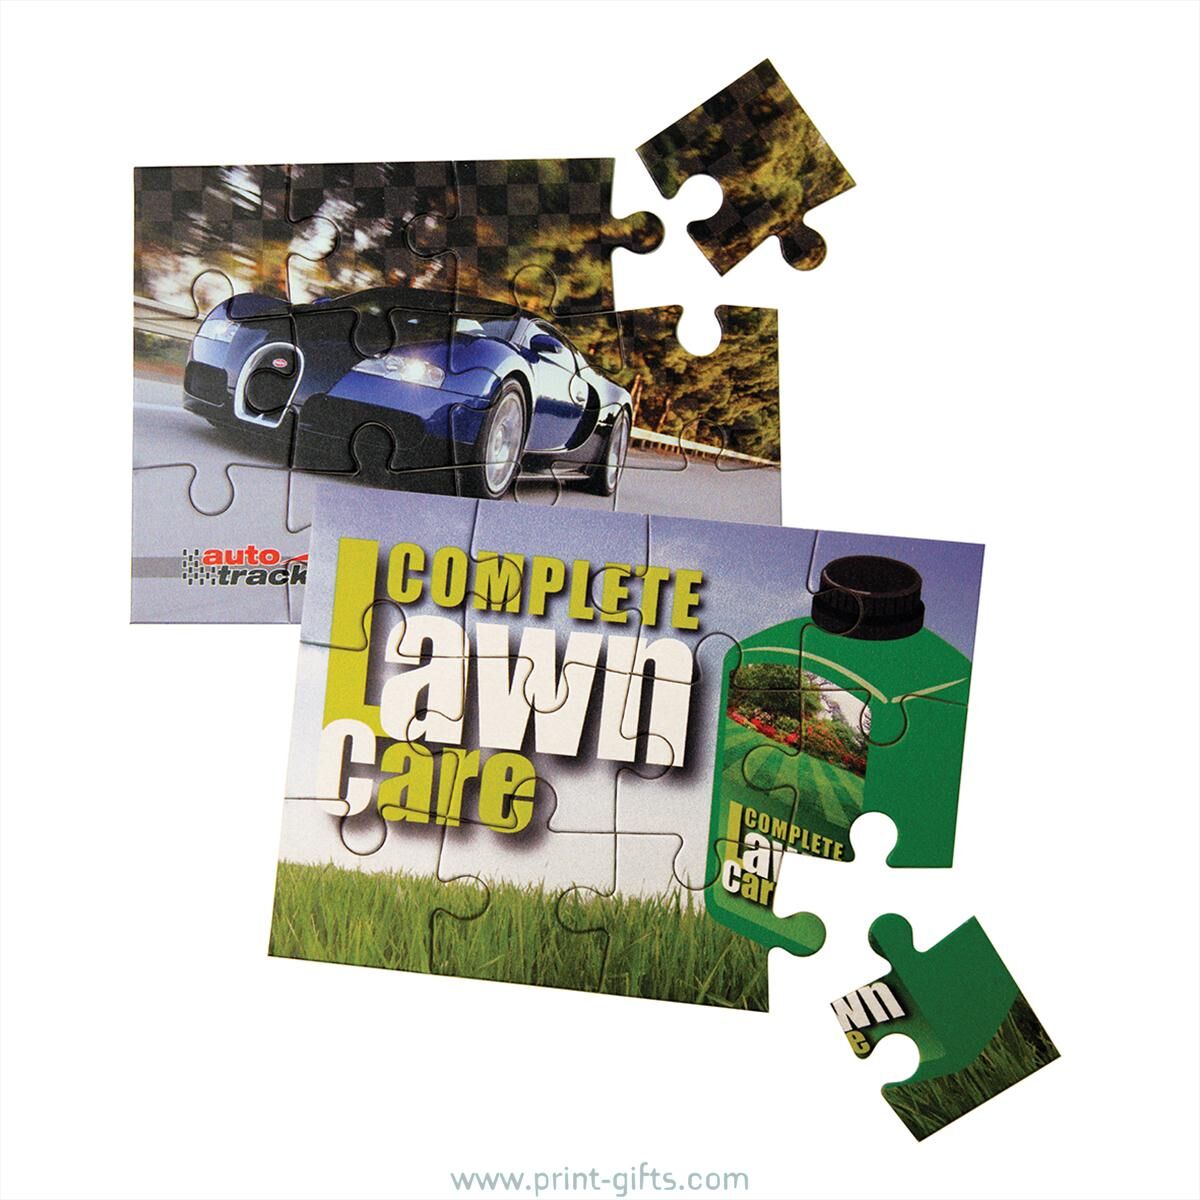 Promotional Printed Jigsaw Puzzles